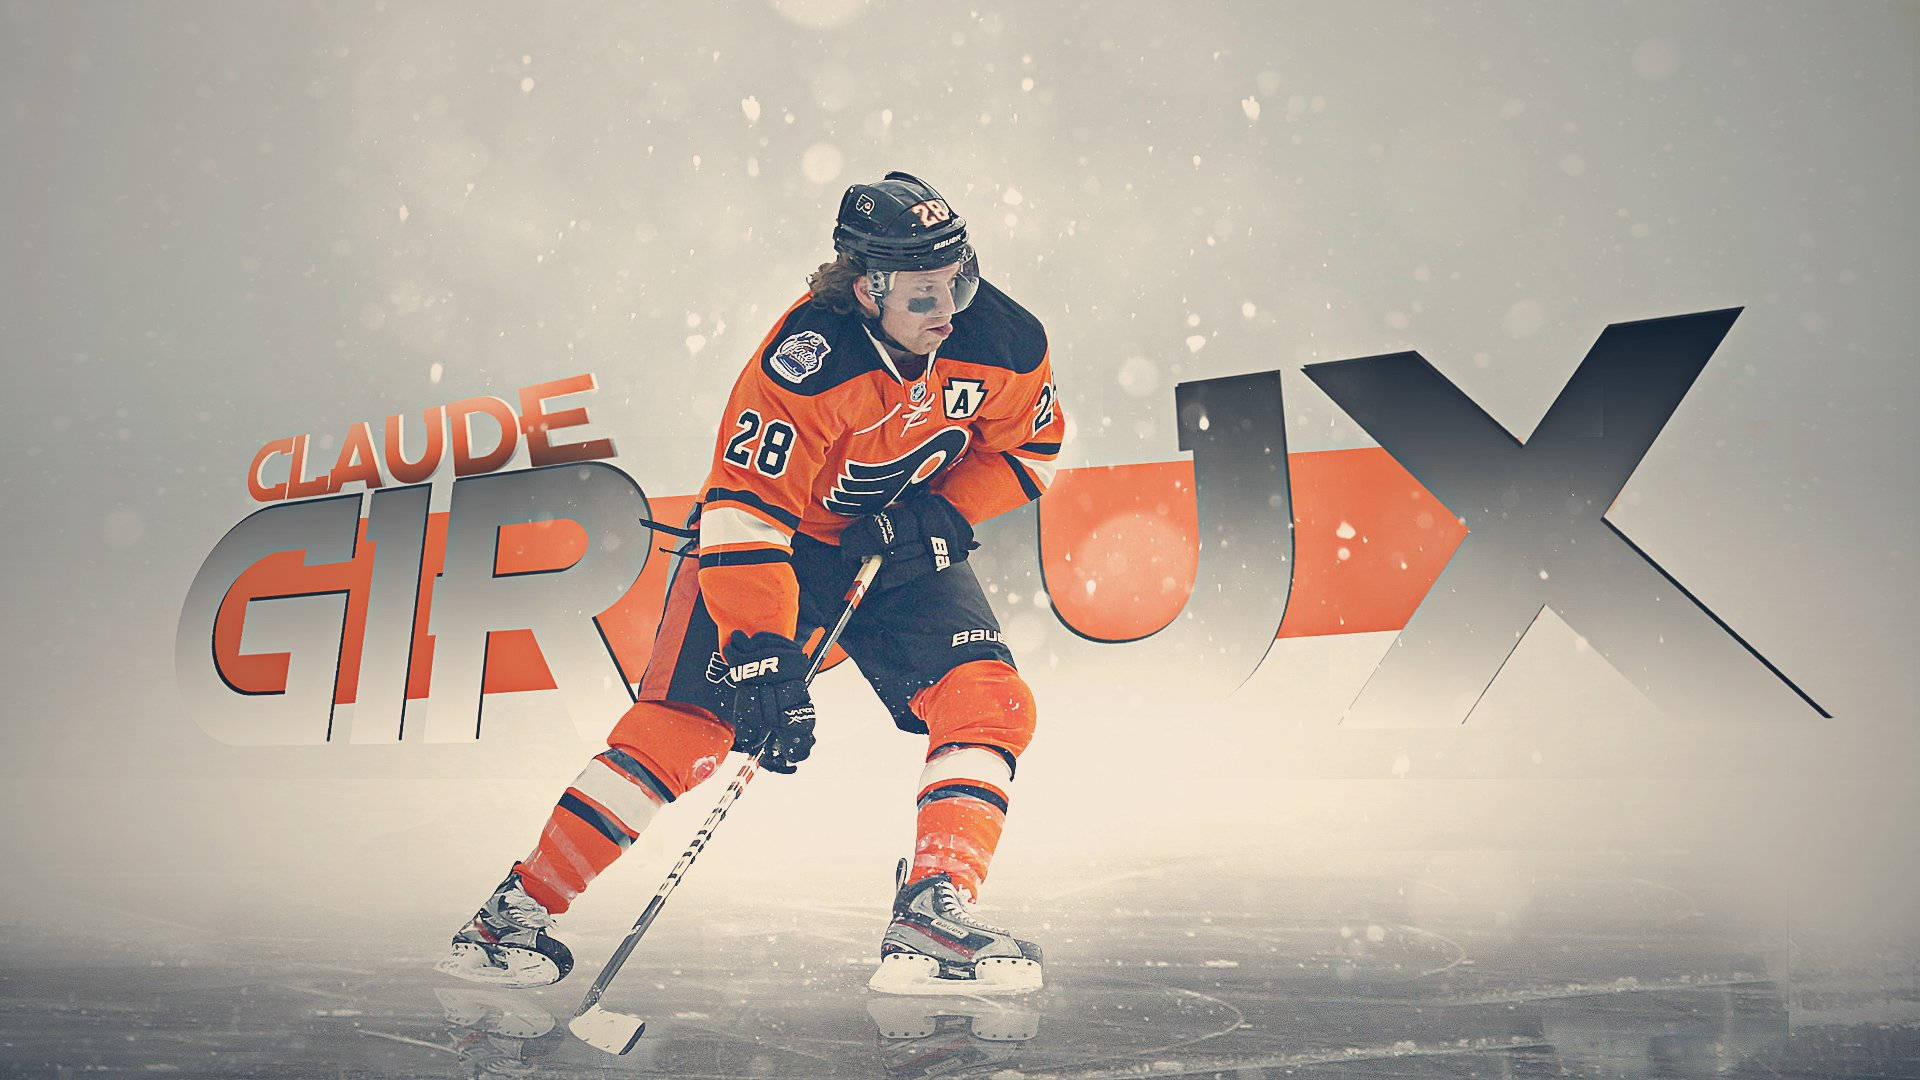 Ice Hockey Star - Claude Giroux In Action Background